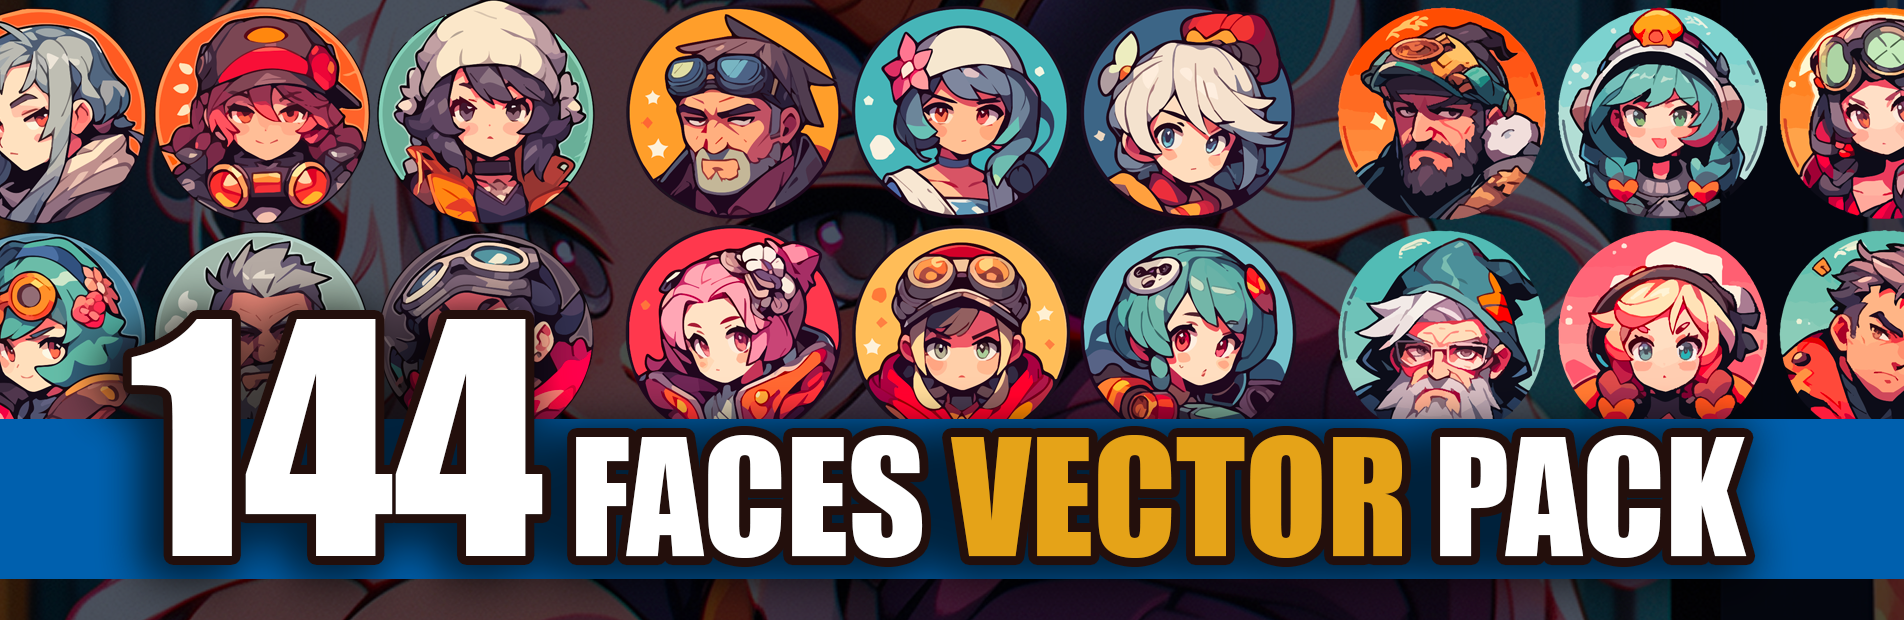 144 VECTOR CHARACTER FACES